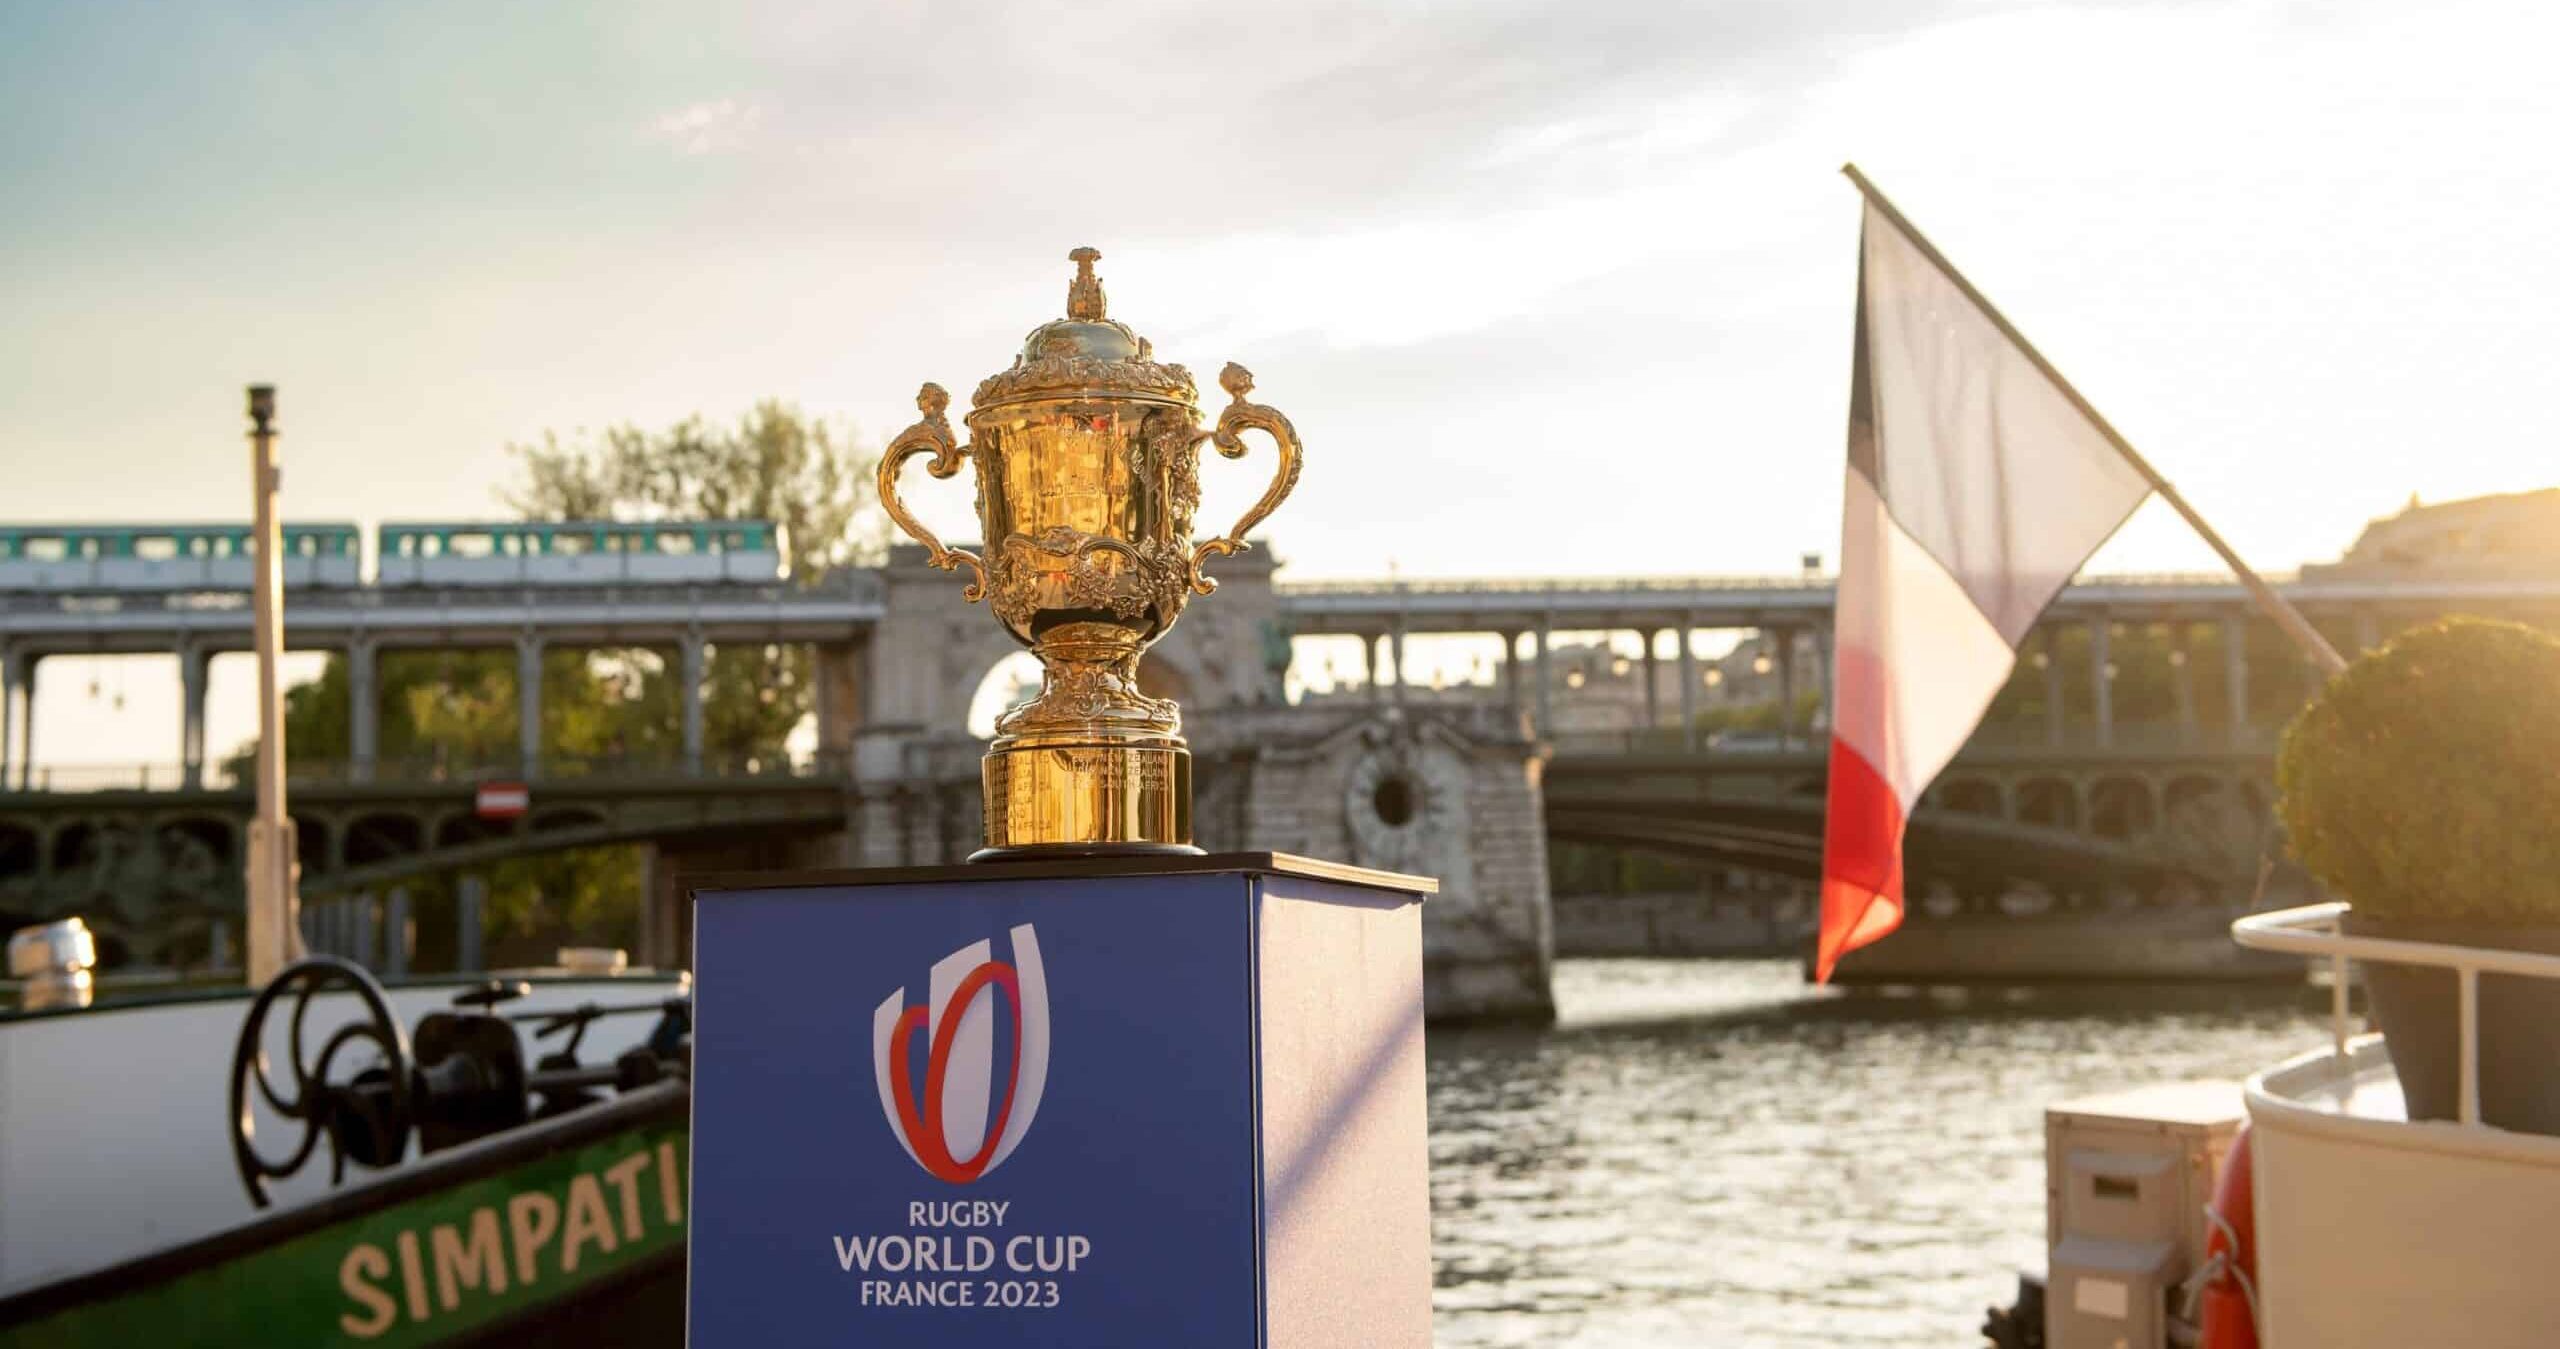 Spectacular and transformational: rugby world cup 2023 raising the bar with one year to go